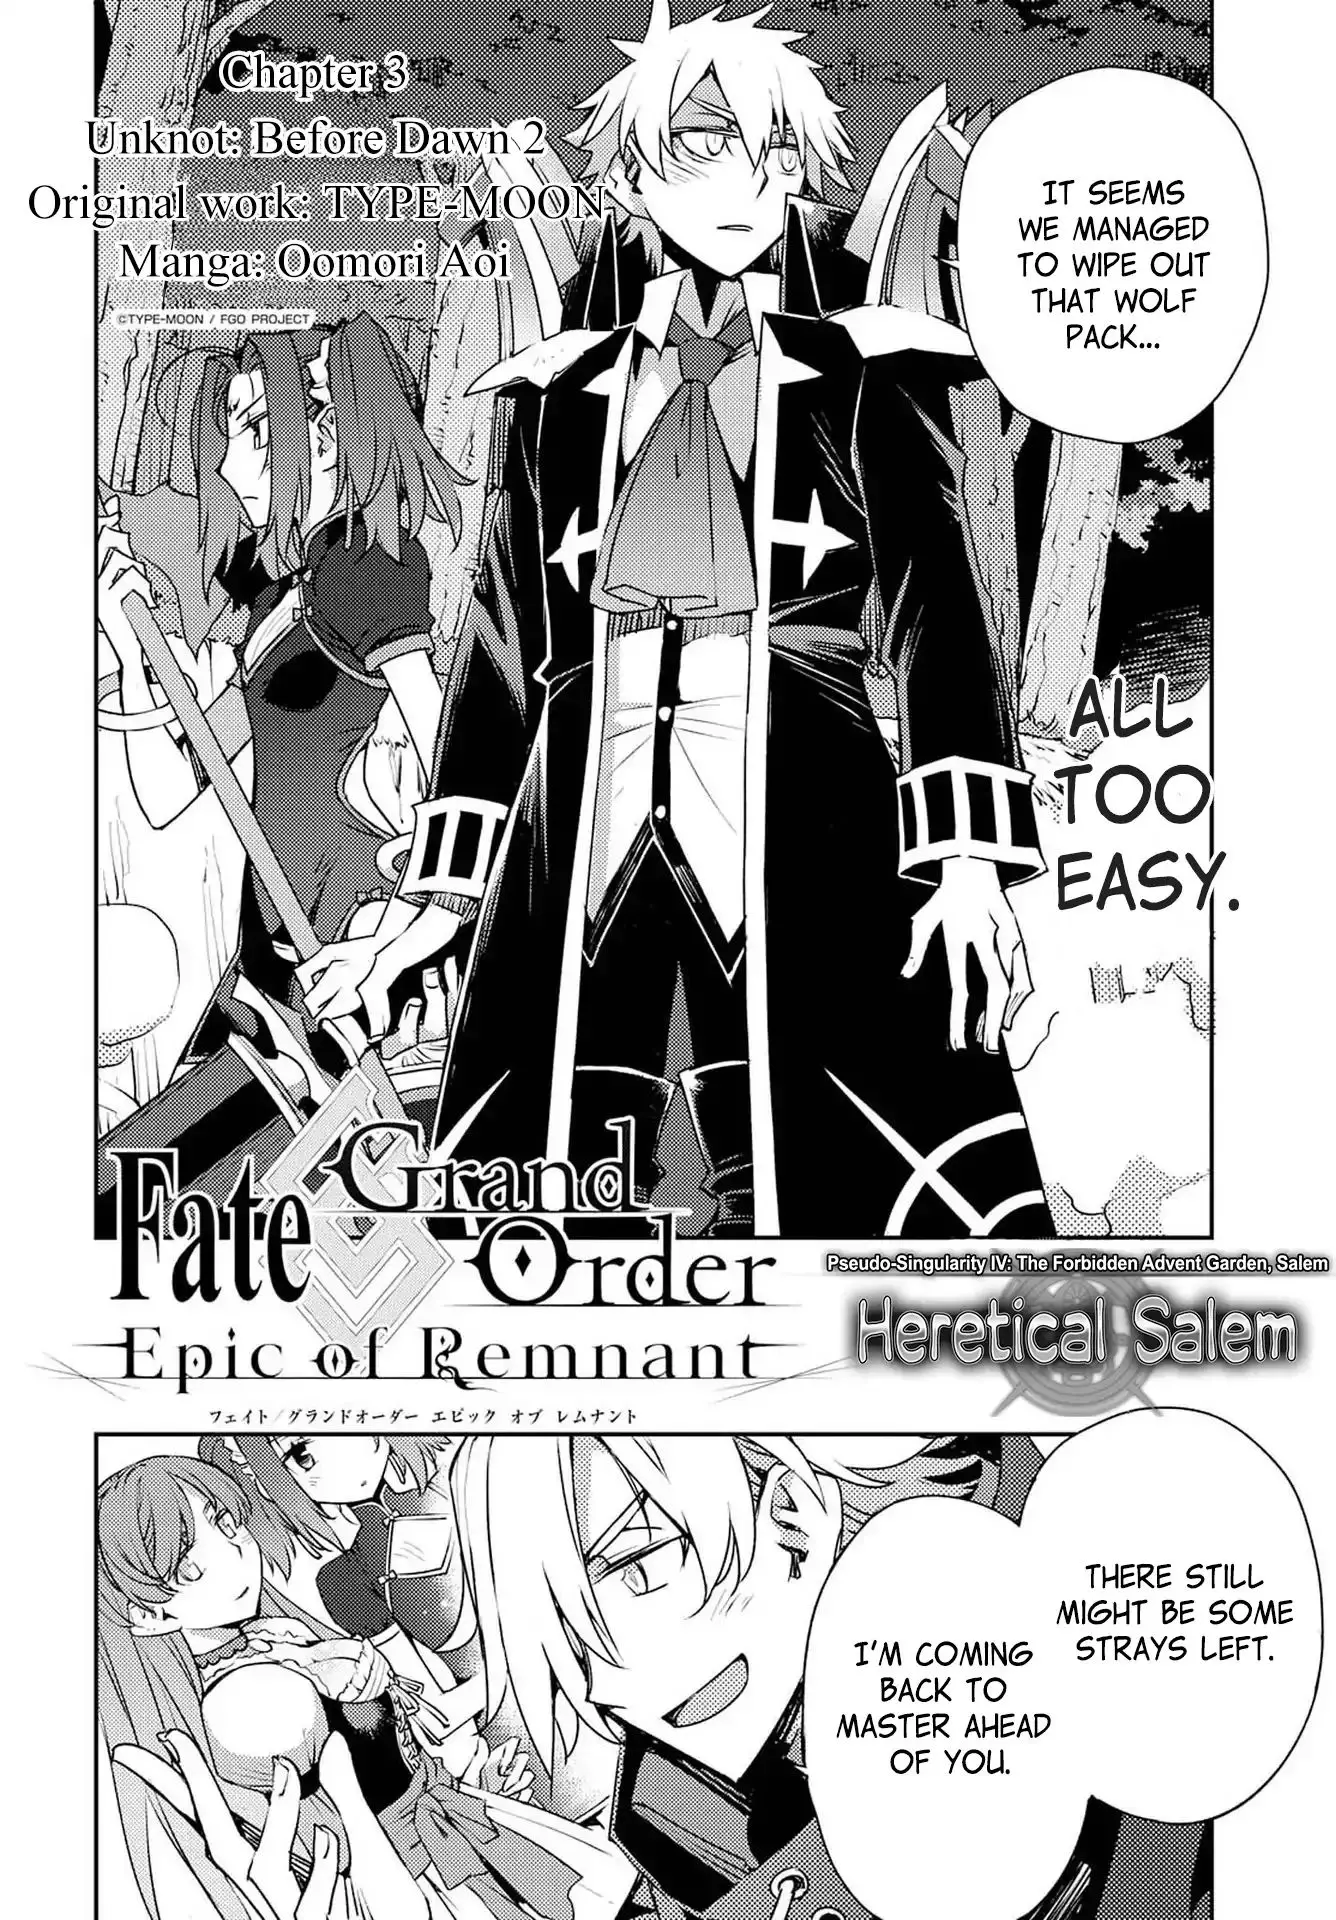 Fate/grand Order: Epic Of Remnant - Subspecies Singularity Iv: Taboo Advent Salem: Salem Of Heresy - 3 page 4